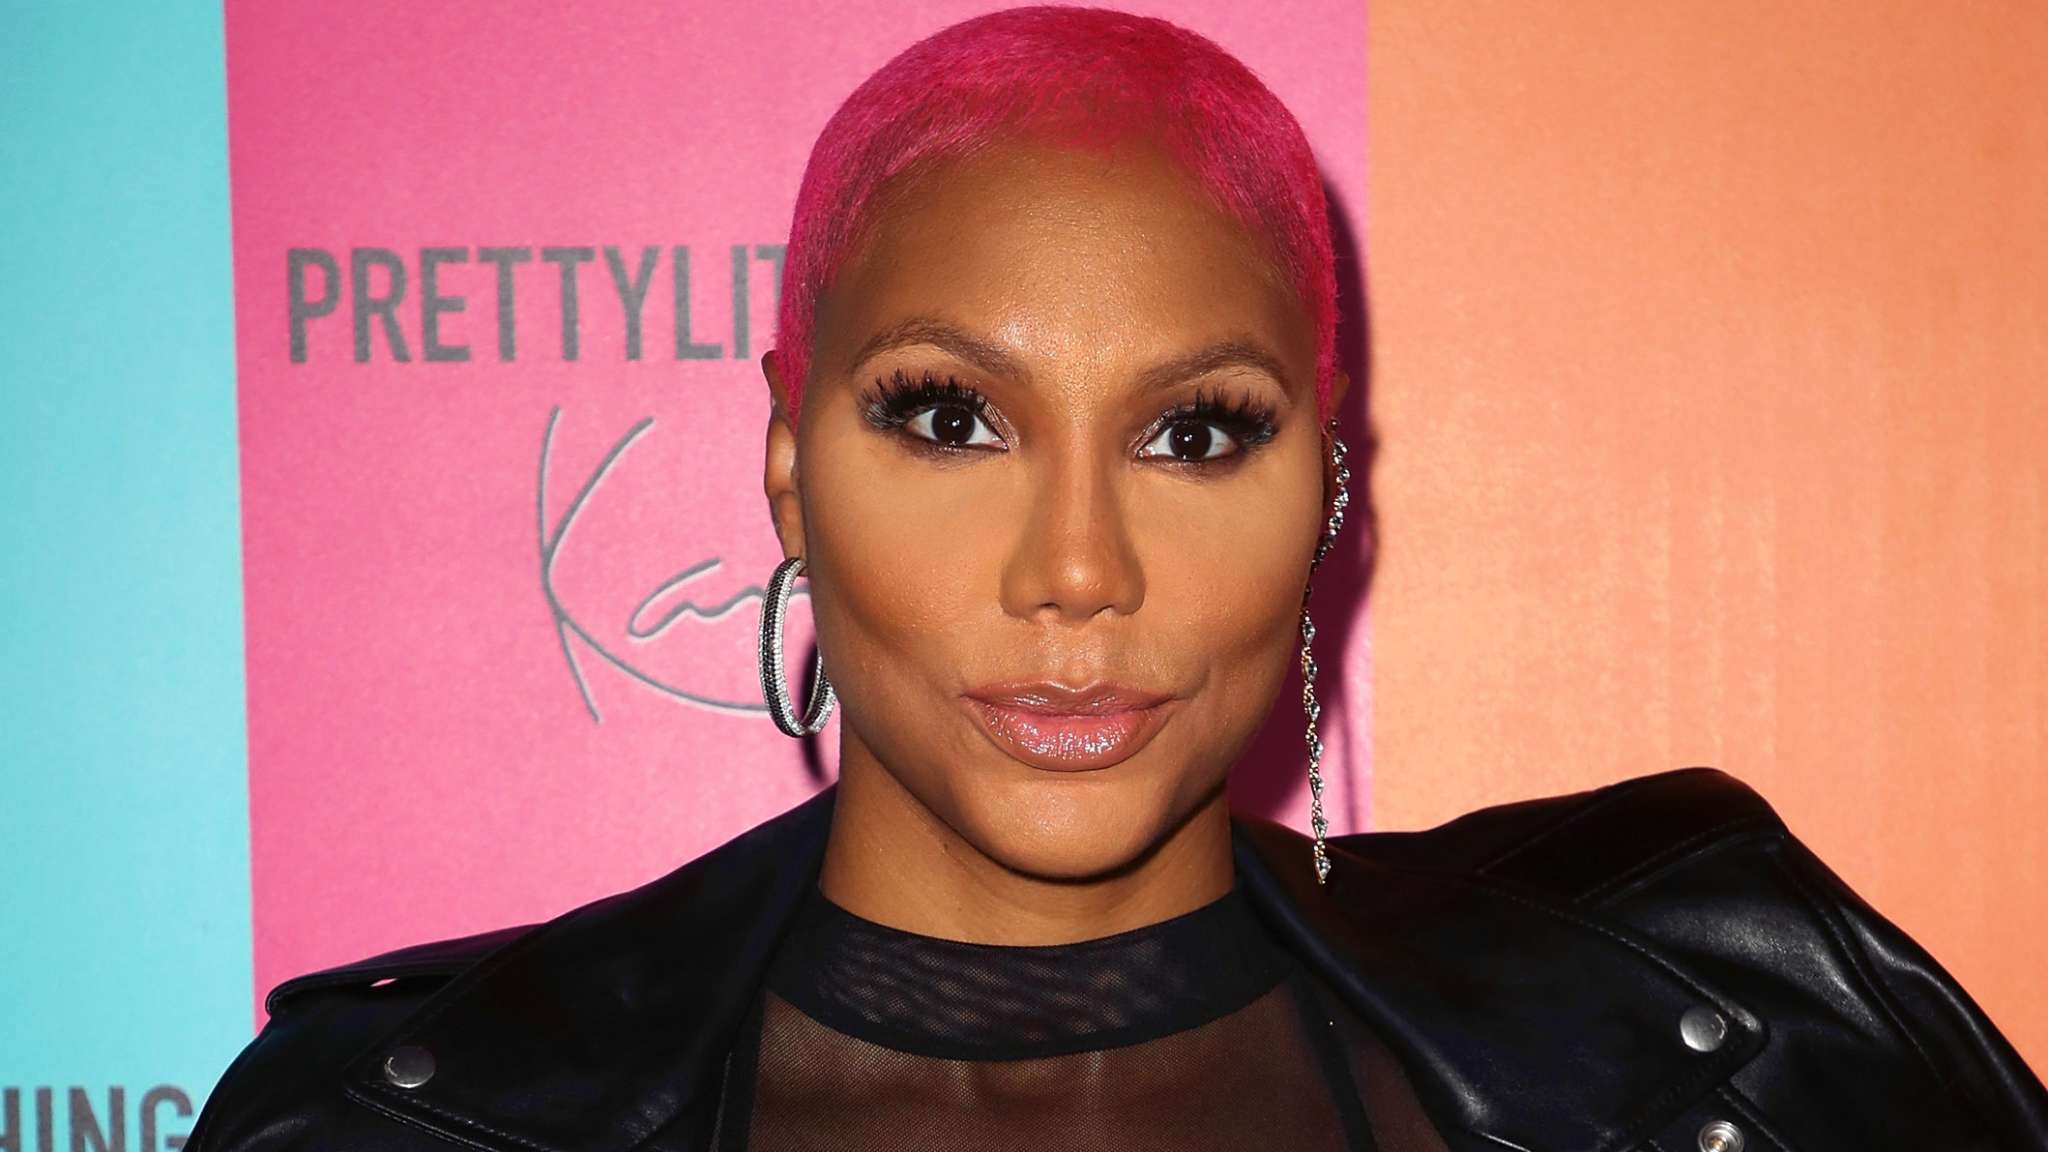 Some Of Tamar Braxton's Fans Seem To Have A Problem With Her Advertising Fashion Nova Clothing